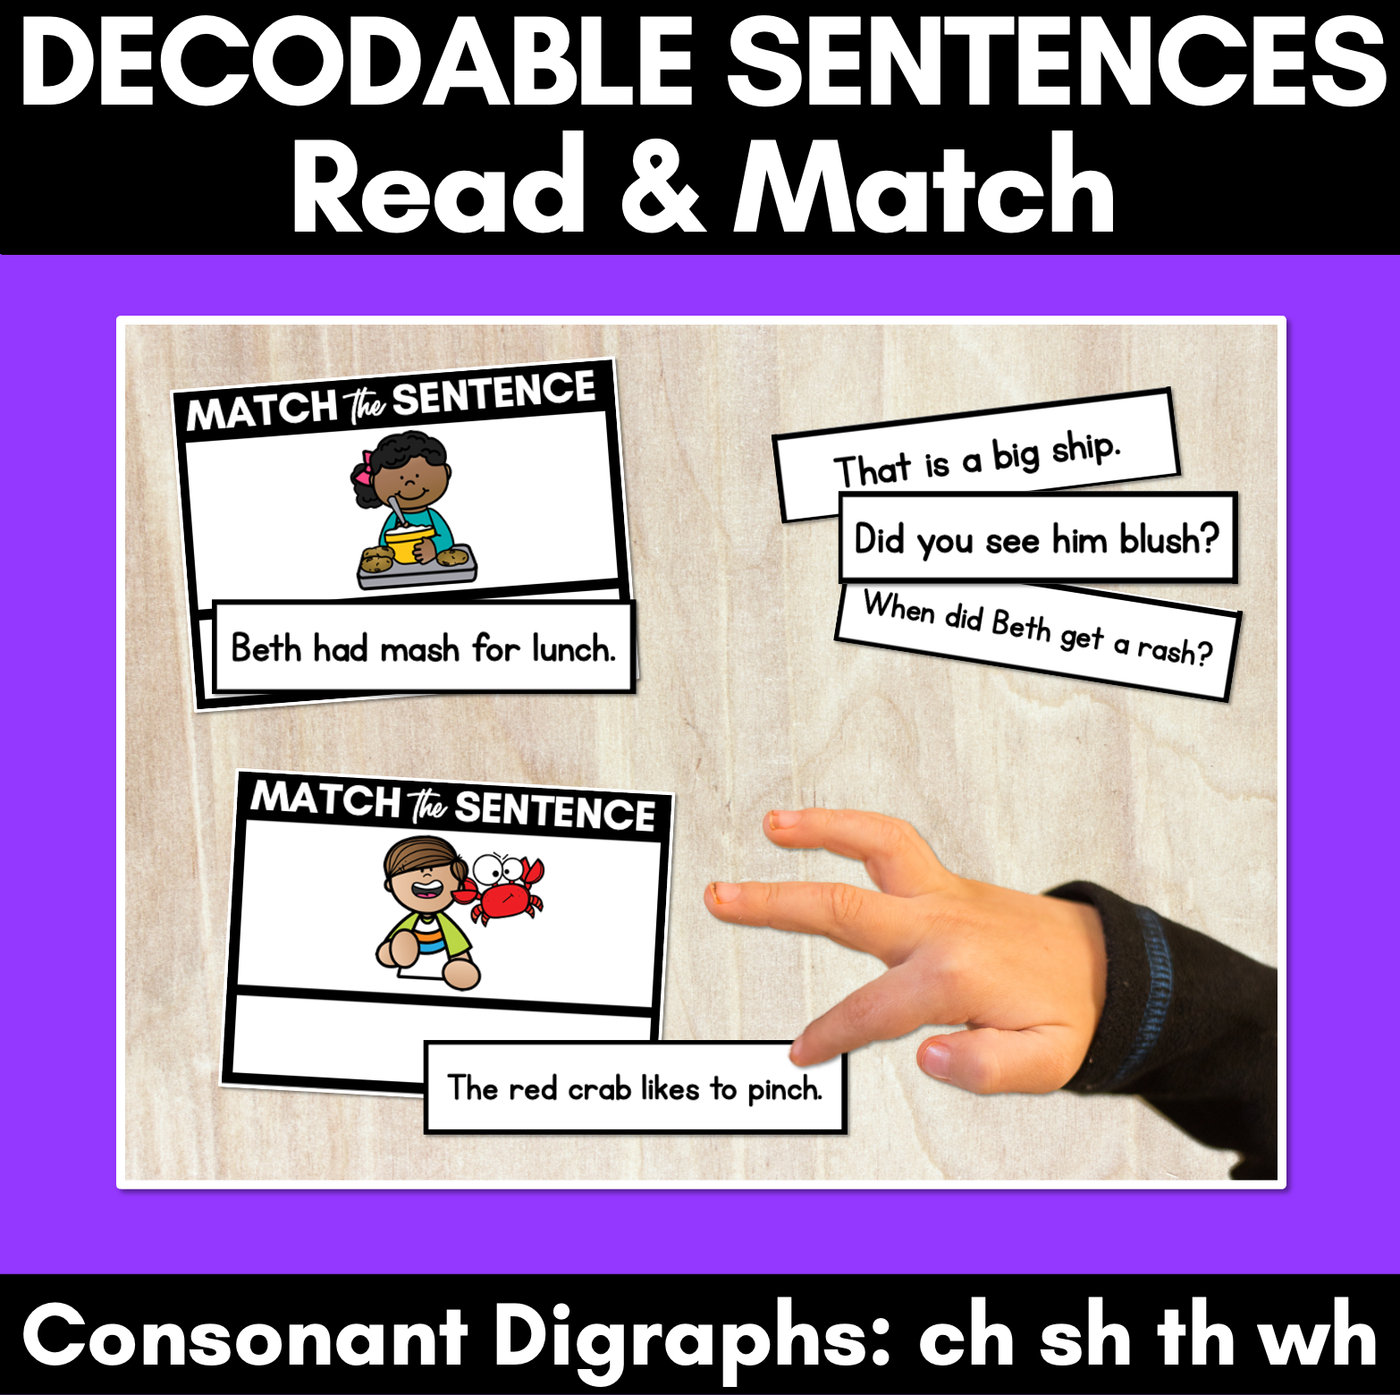 CH SH TH WH Decodable Sentences - Read and Match